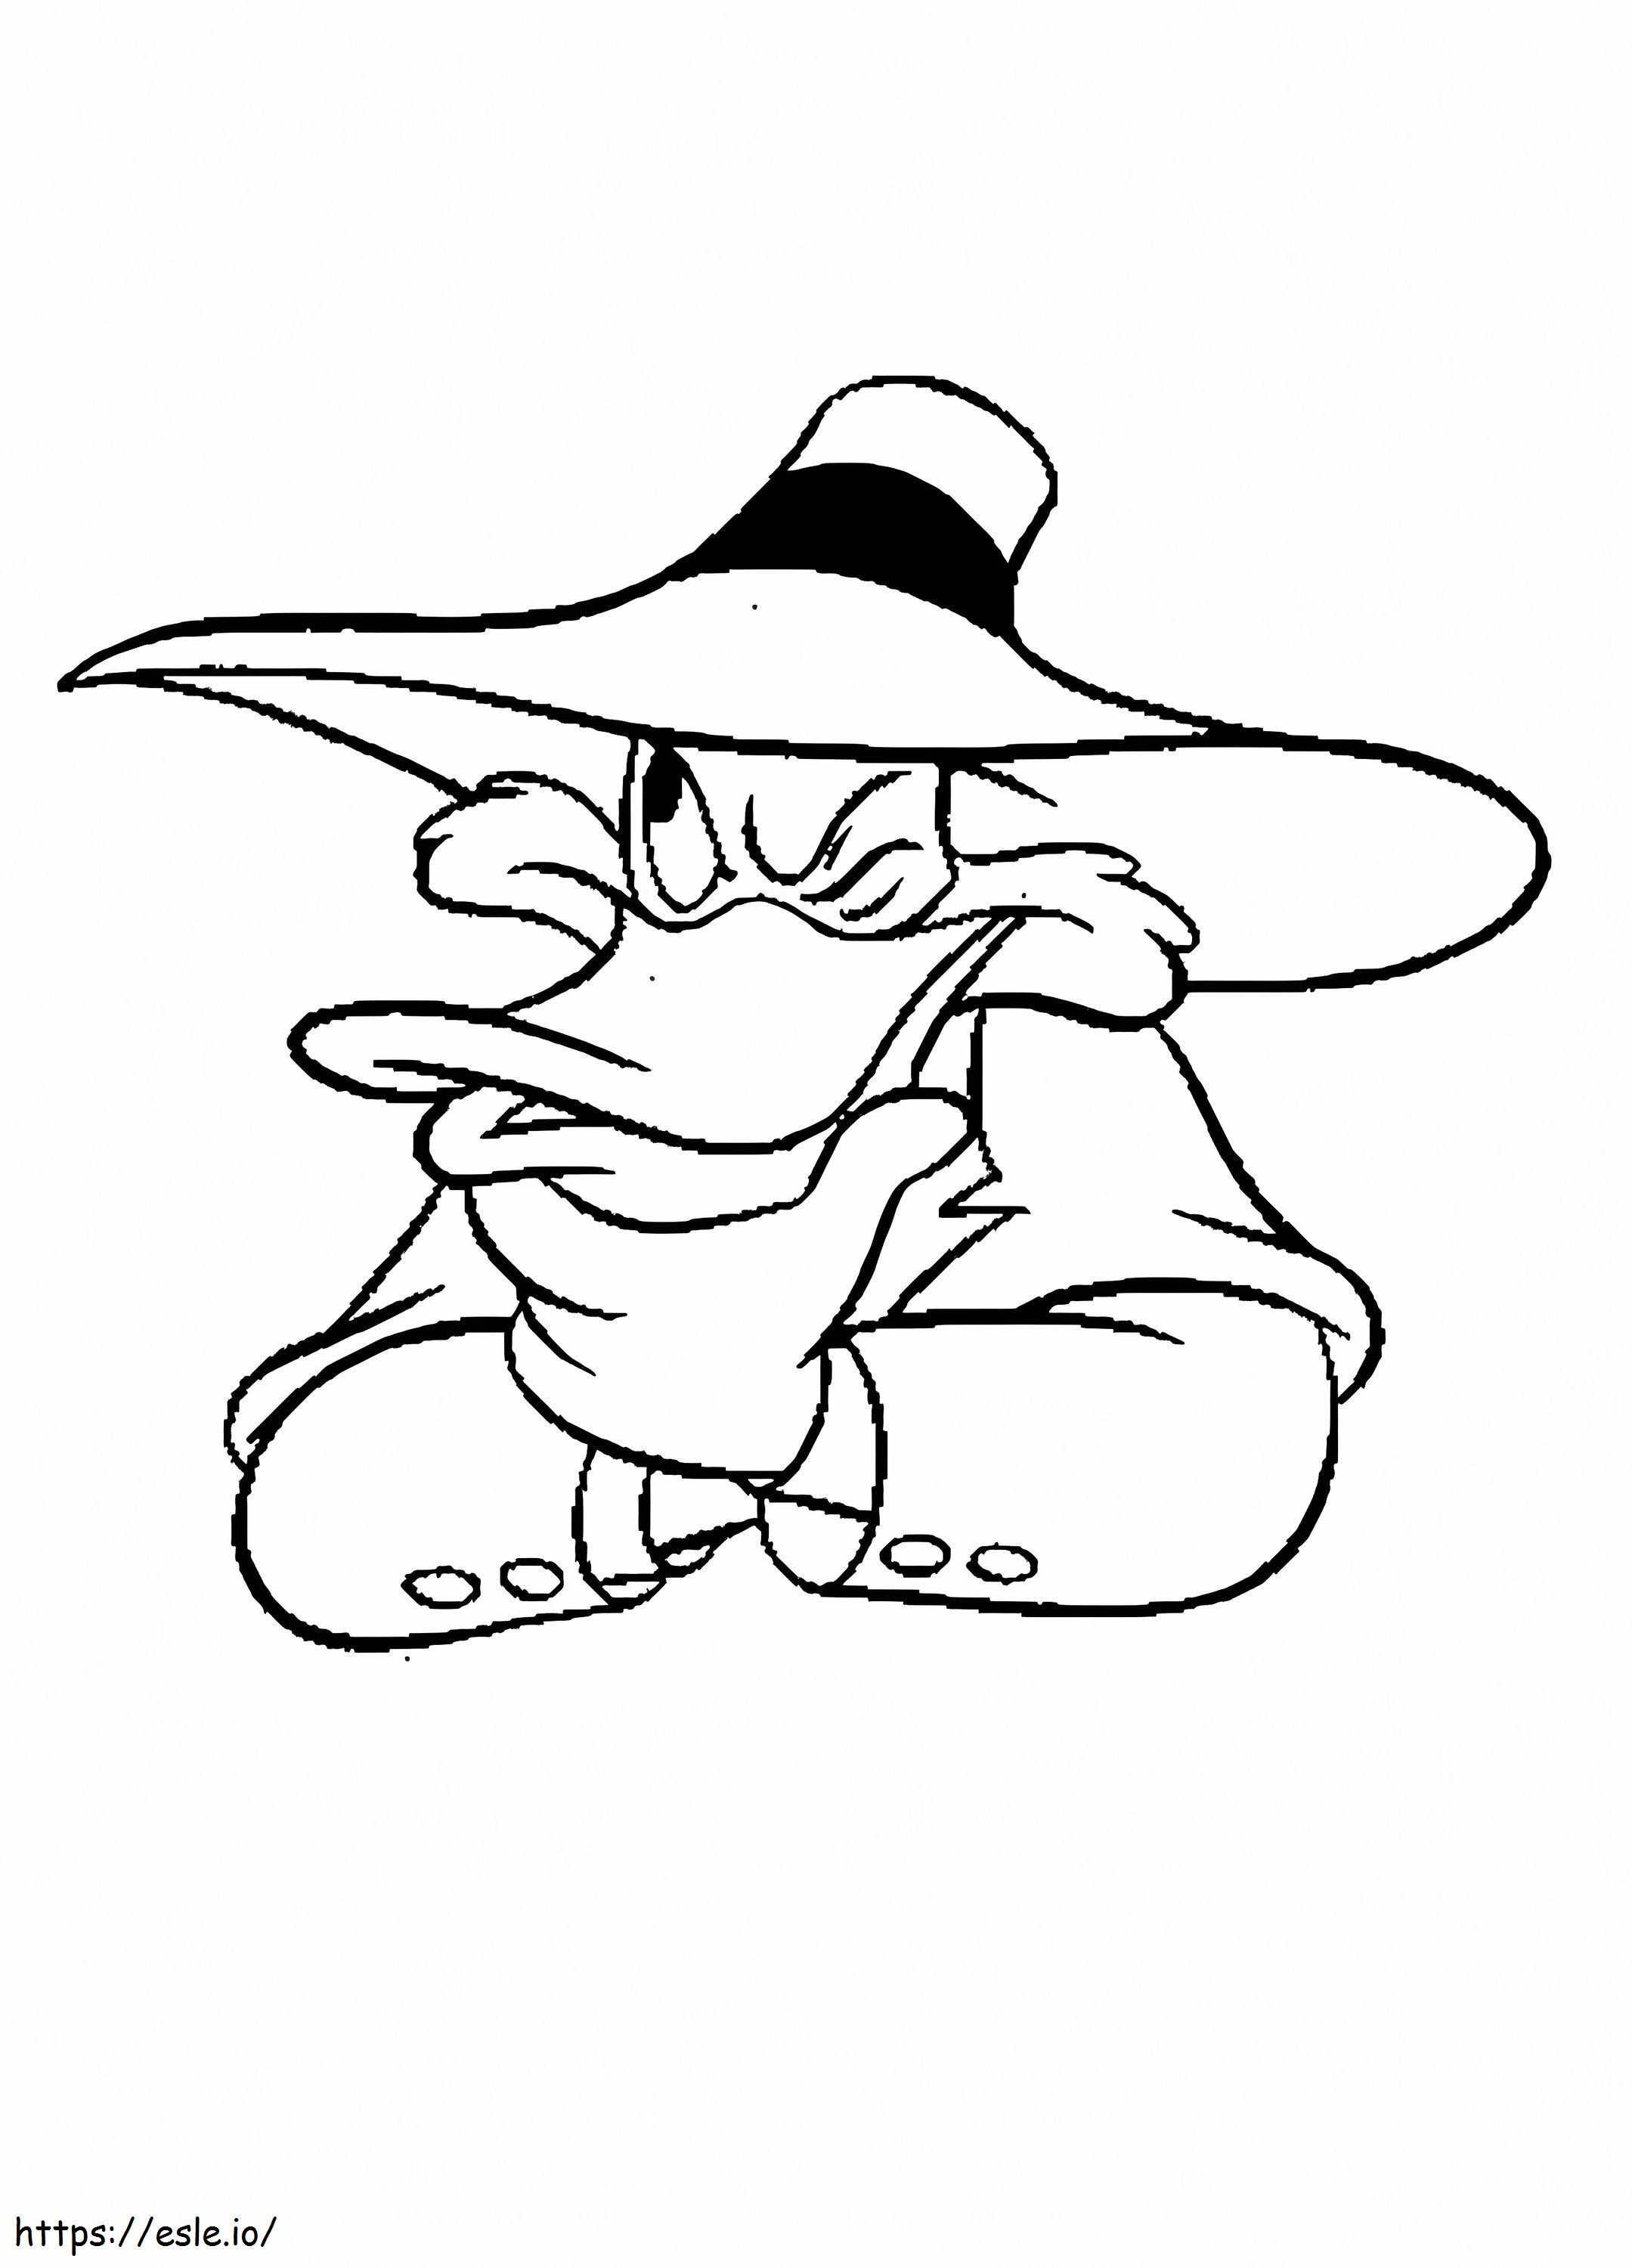 Print Darkwing Duck coloring page